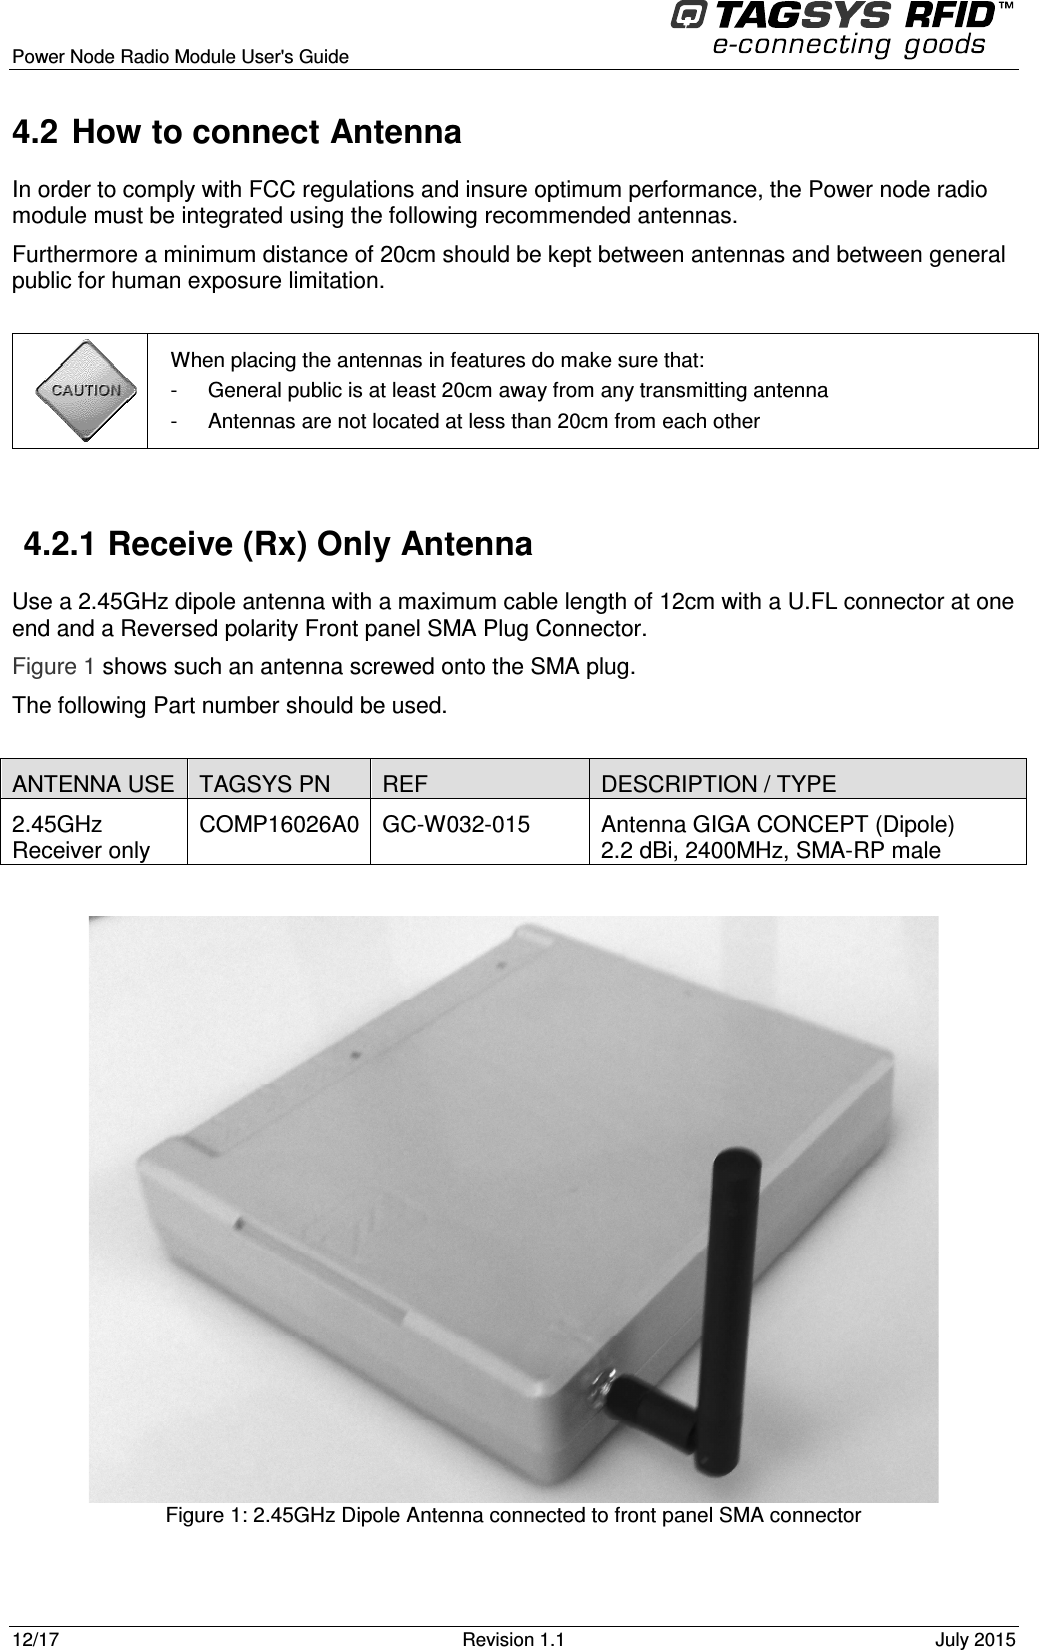  Power Node Radio Module User&apos;s Guide     12/17  Revision 1.1  July 2015  4.2  How to connect Antenna In order to comply with FCC regulations and insure optimum performance, the Power node radio module must be integrated using the following recommended antennas. Furthermore a minimum distance of 20cm should be kept between antennas and between general public for human exposure limitation.   When placing the antennas in features do make sure that: -  General public is at least 20cm away from any transmitting antenna -  Antennas are not located at less than 20cm from each other  4.2.1  Receive (Rx) Only Antenna Use a 2.45GHz dipole antenna with a maximum cable length of 12cm with a U.FL connector at one end and a Reversed polarity Front panel SMA Plug Connector. Figure 1 shows such an antenna screwed onto the SMA plug. The following Part number should be used.  ANTENNA USE  TAGSYS PN  REF  DESCRIPTION / TYPE  2.45GHz  Receiver only COMP16026A0 GC-W032-015  Antenna GIGA CONCEPT (Dipole) 2.2 dBi, 2400MHz, SMA-RP male   Figure 1: 2.45GHz Dipole Antenna connected to front panel SMA connector  